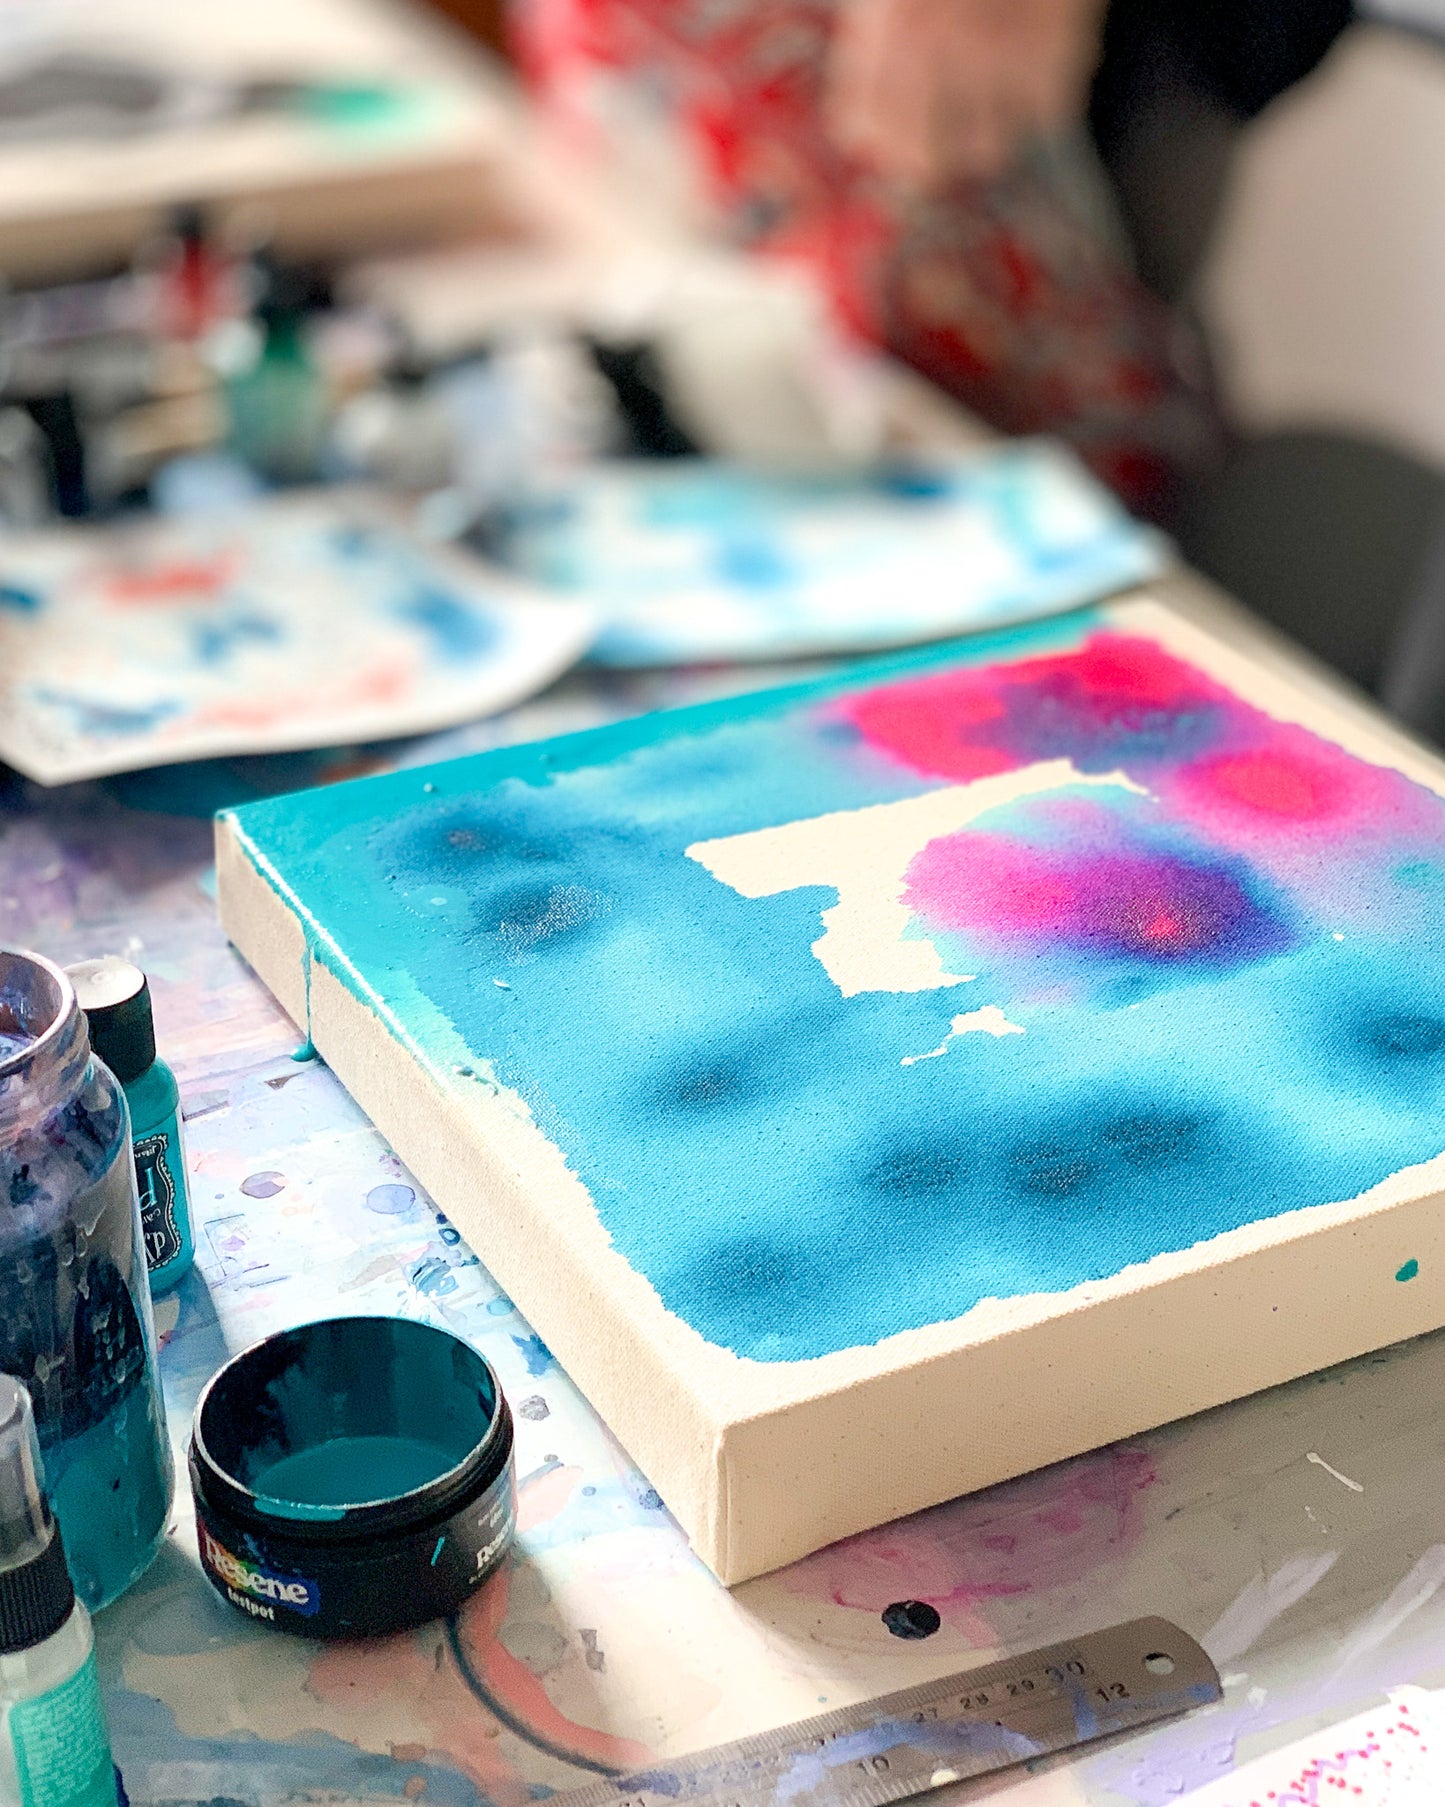 Abstract Painting Workshop ~ November 19th 2023